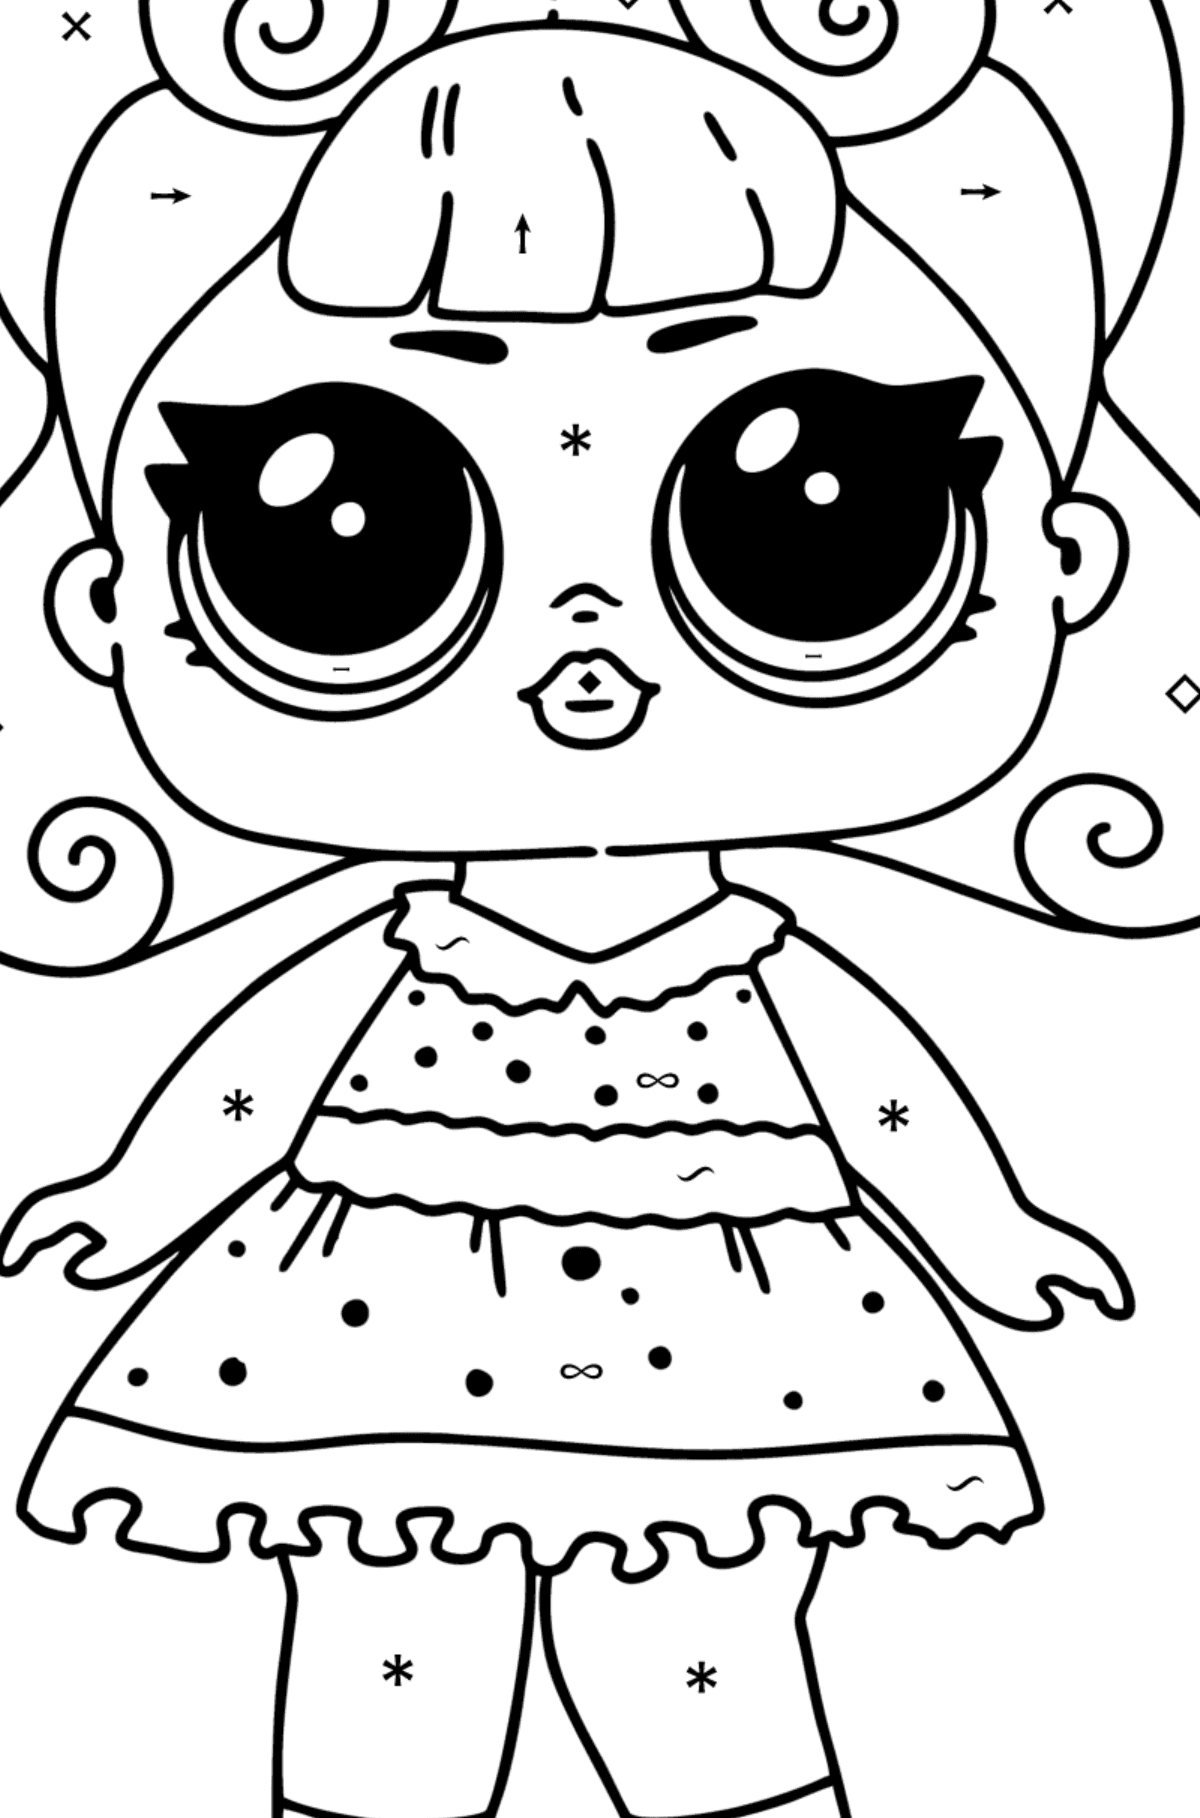 LOL Surprise Jitterbug coloring page - Coloring by Symbols for Kids